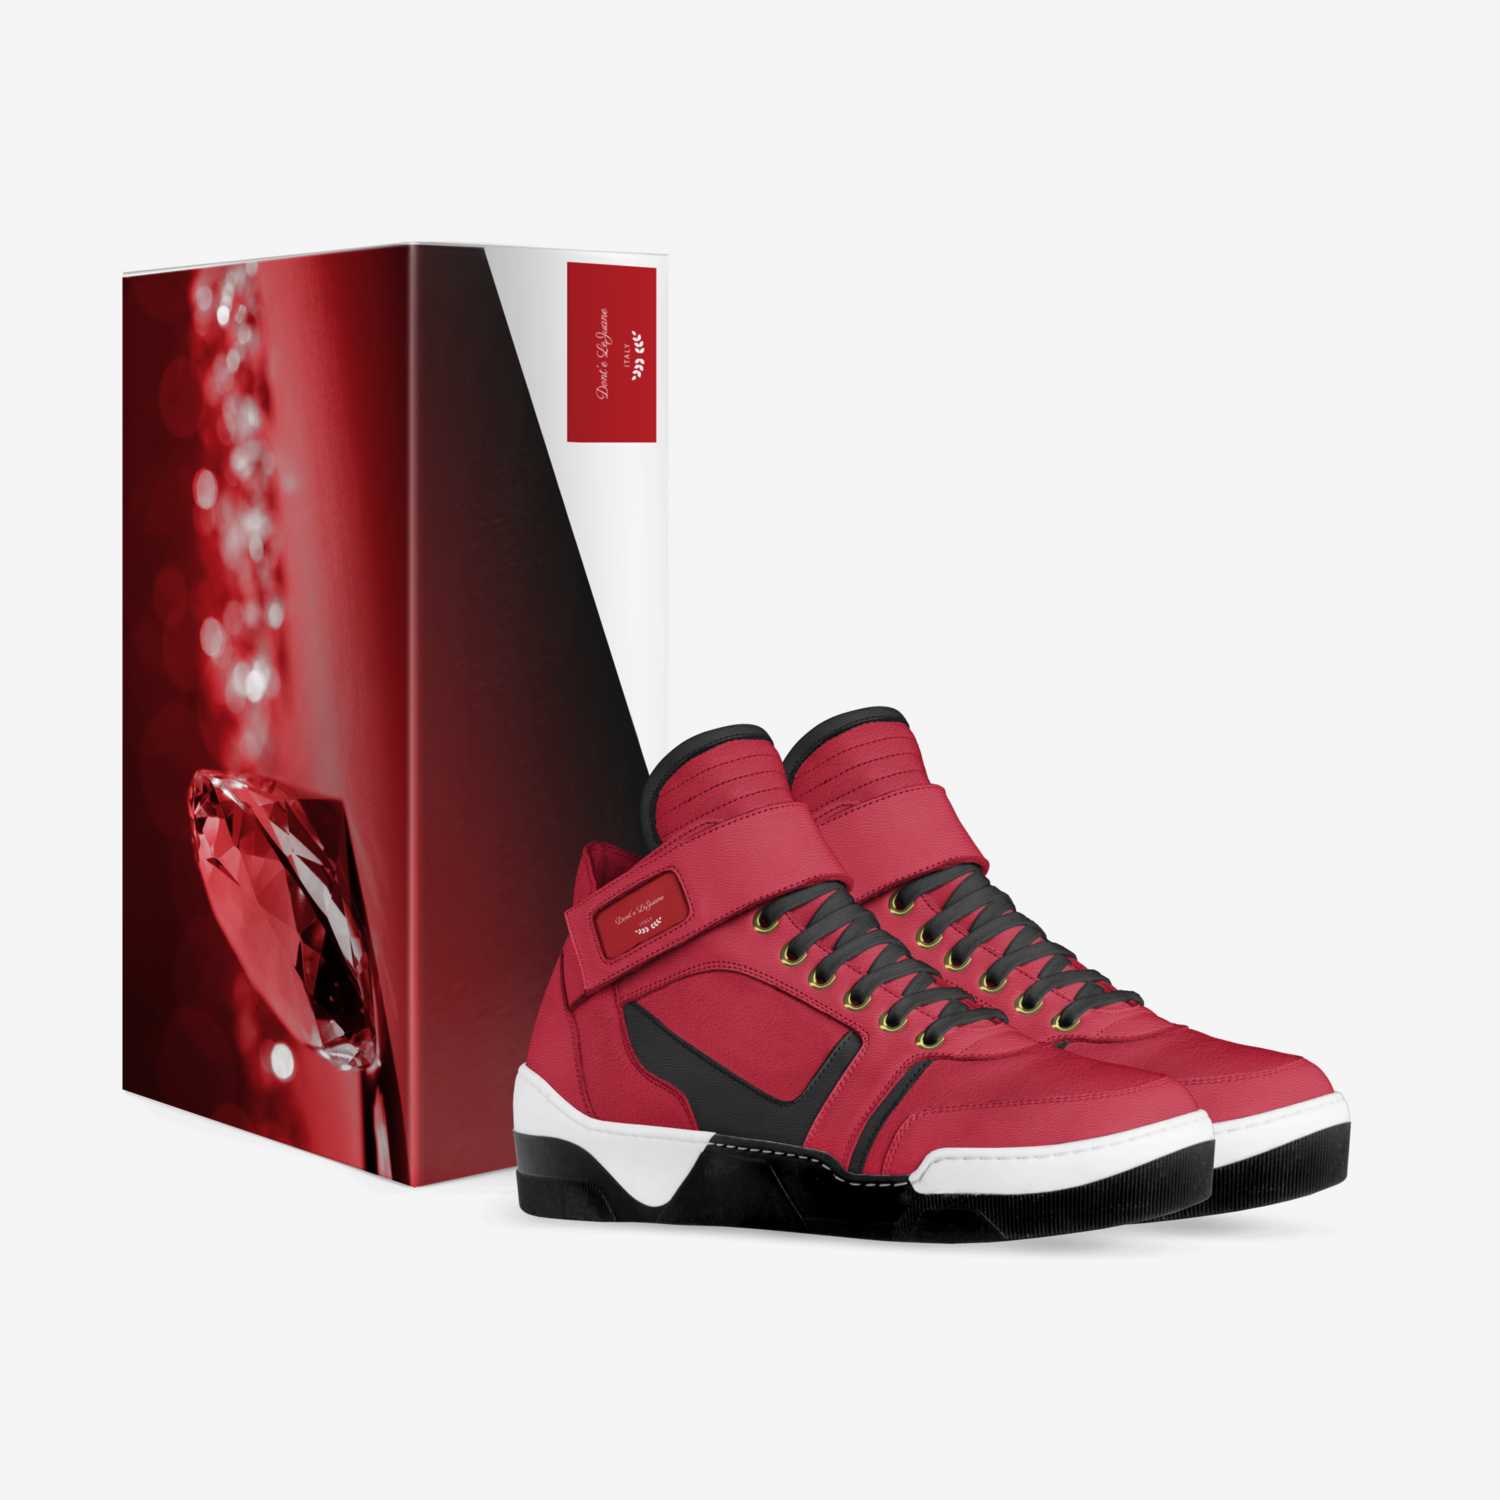 Dont'e LeJuane custom made in Italy shoes by Omarr Alexander | Box view